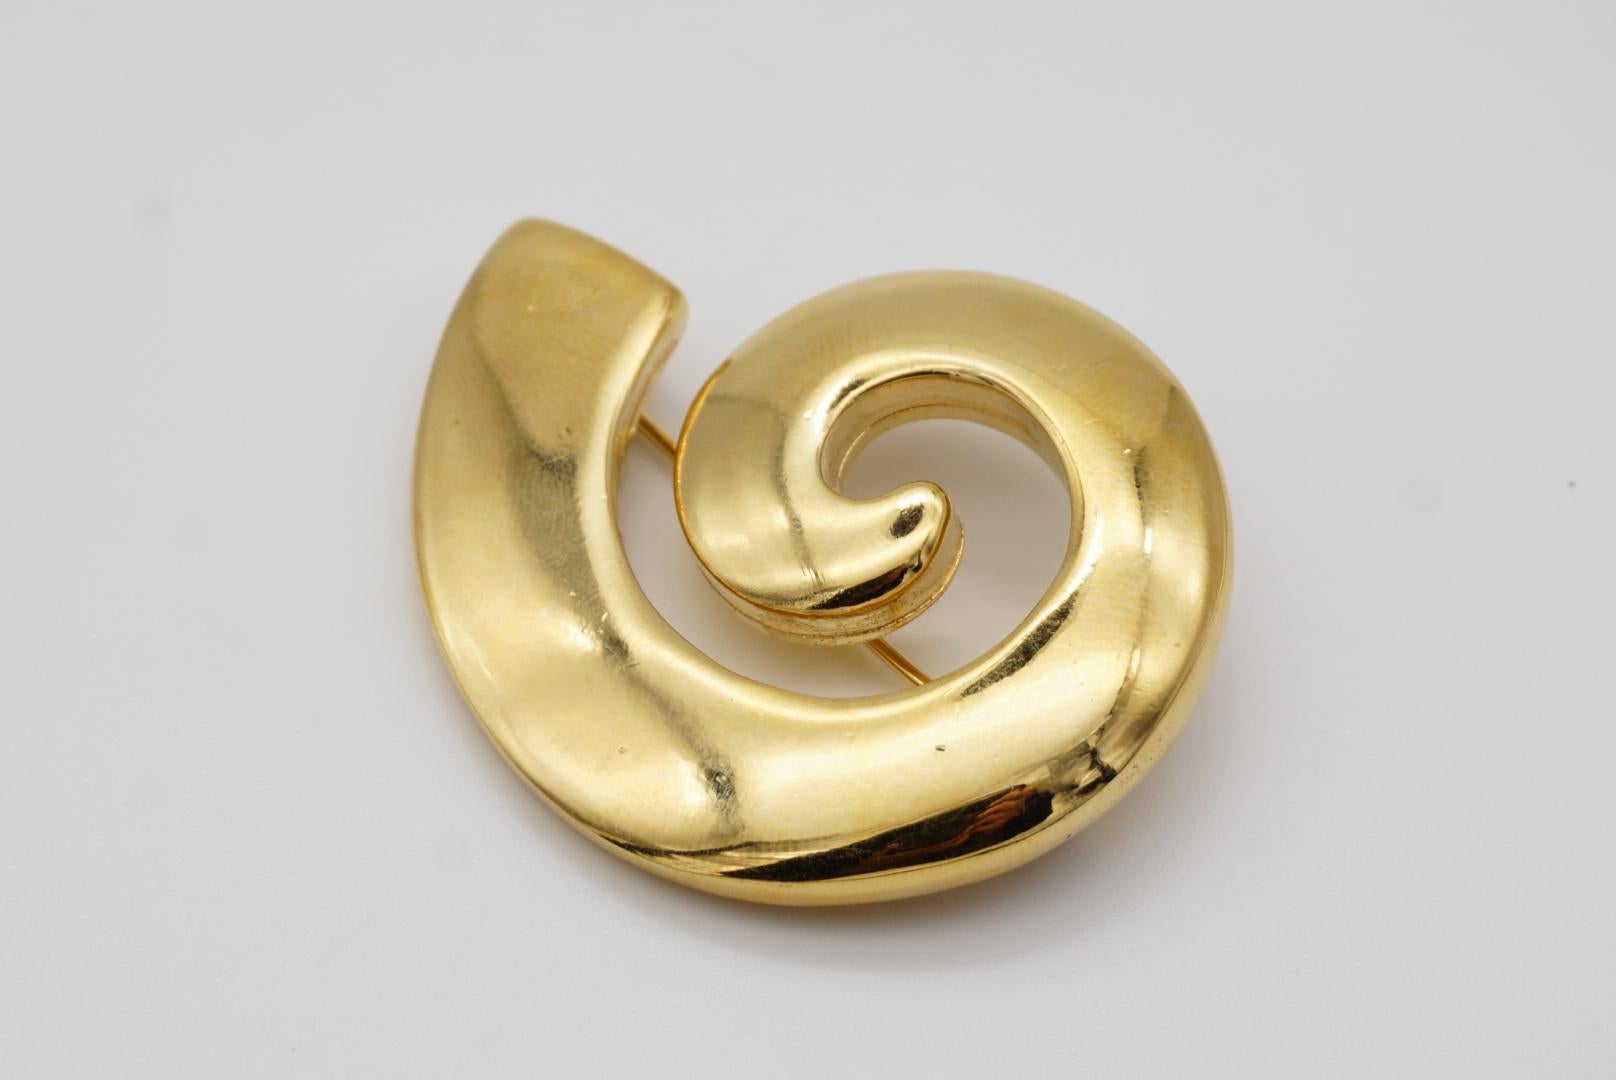 Givenchy Vintage 1980s Large Glow Swirl Sculpted Abstract Modernist Gold Brooch For Sale 2